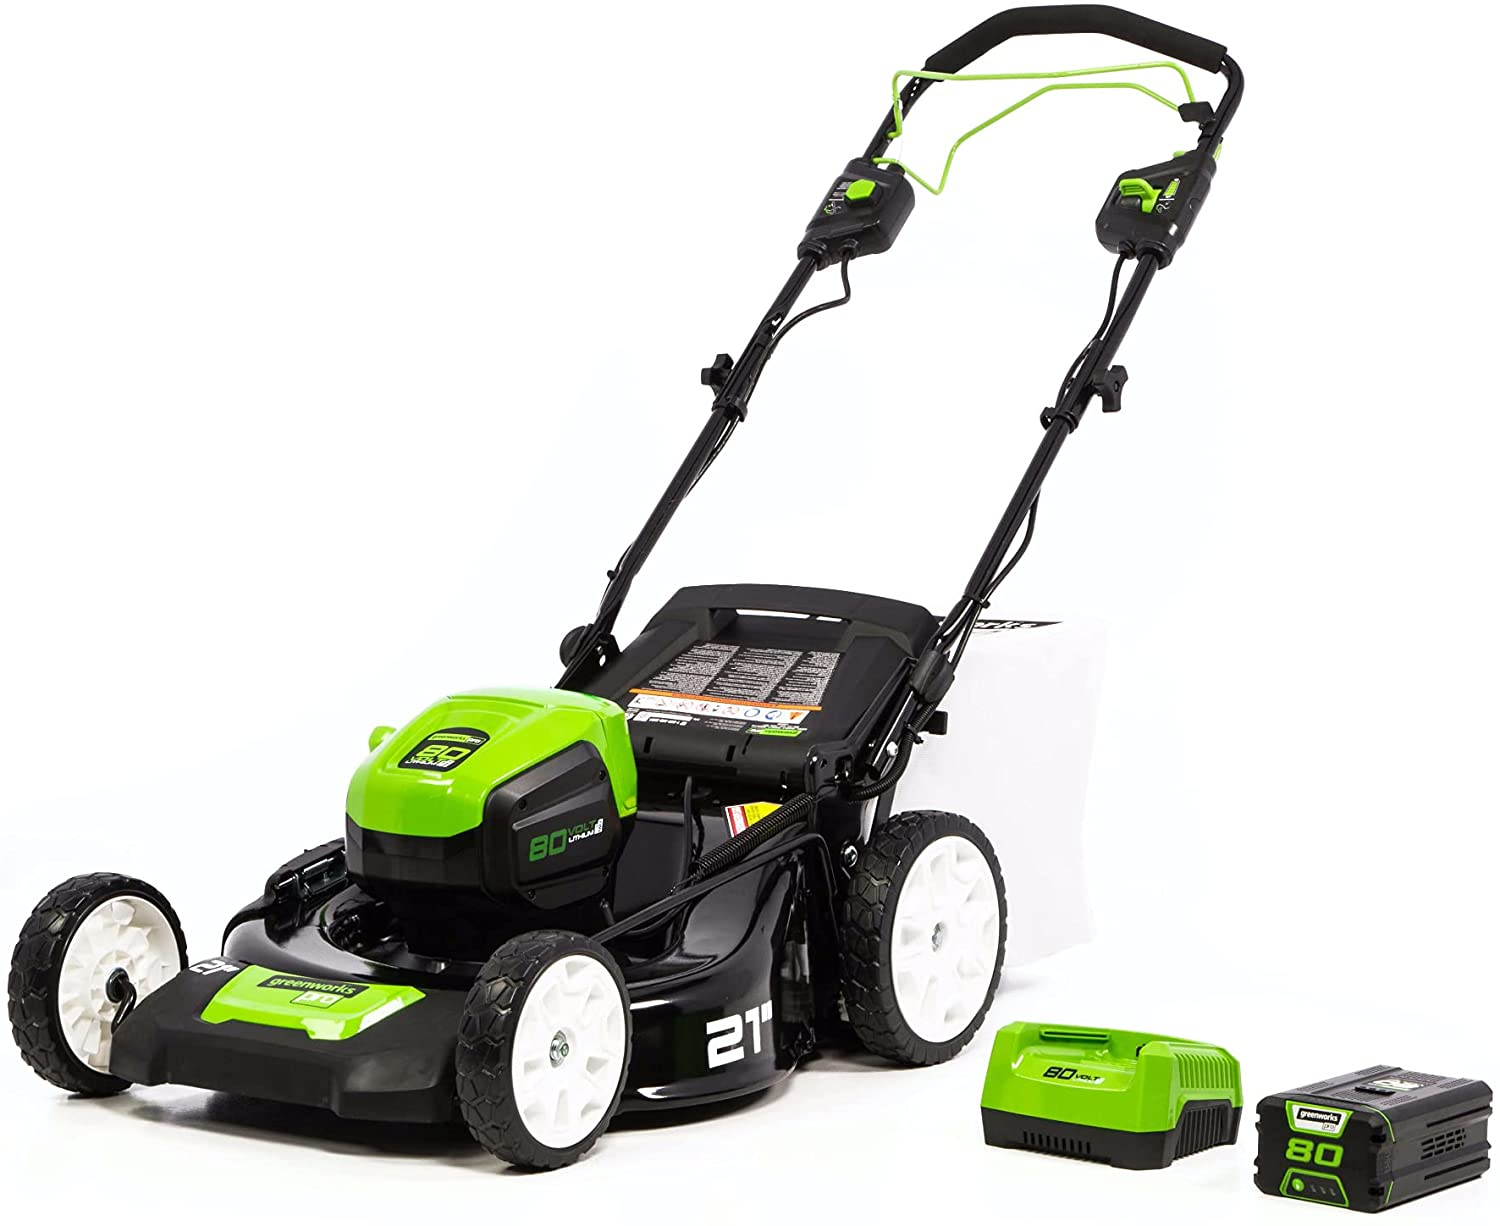 Amazon.com: Greenworks Pro 80V 21-Inch Brushless Self-Propelled Lawn Mower 4.0Ah Battery and Charger Included, MO80L410 $380.00